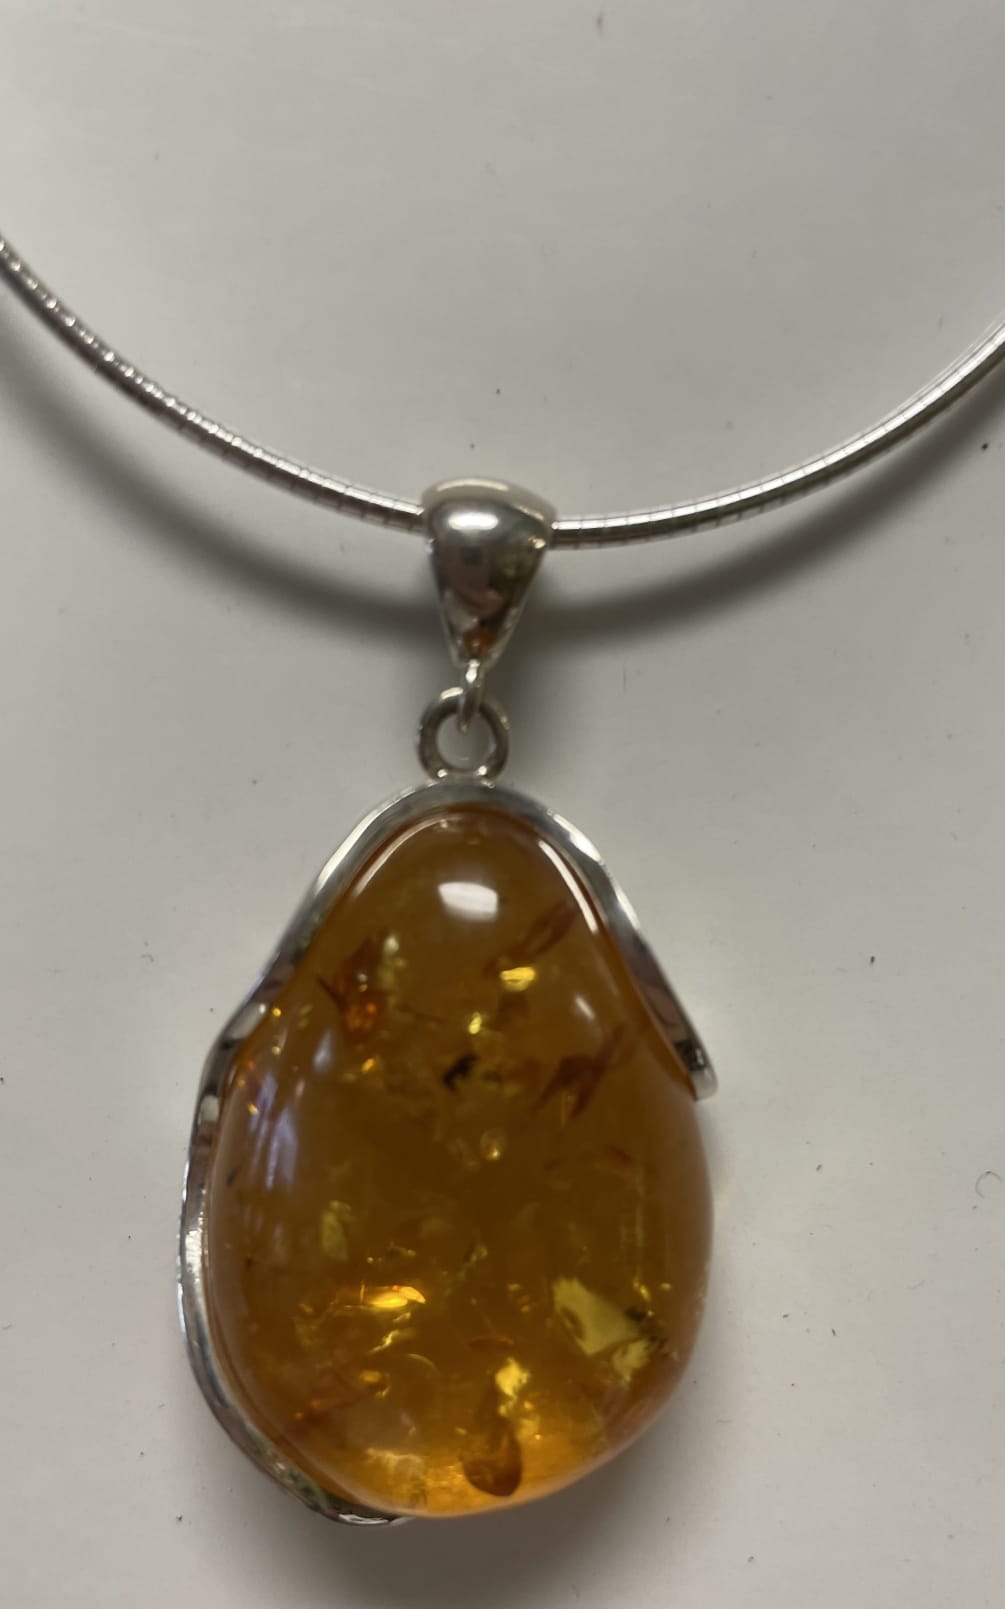 This is a really beautiful piece of amber that has been set